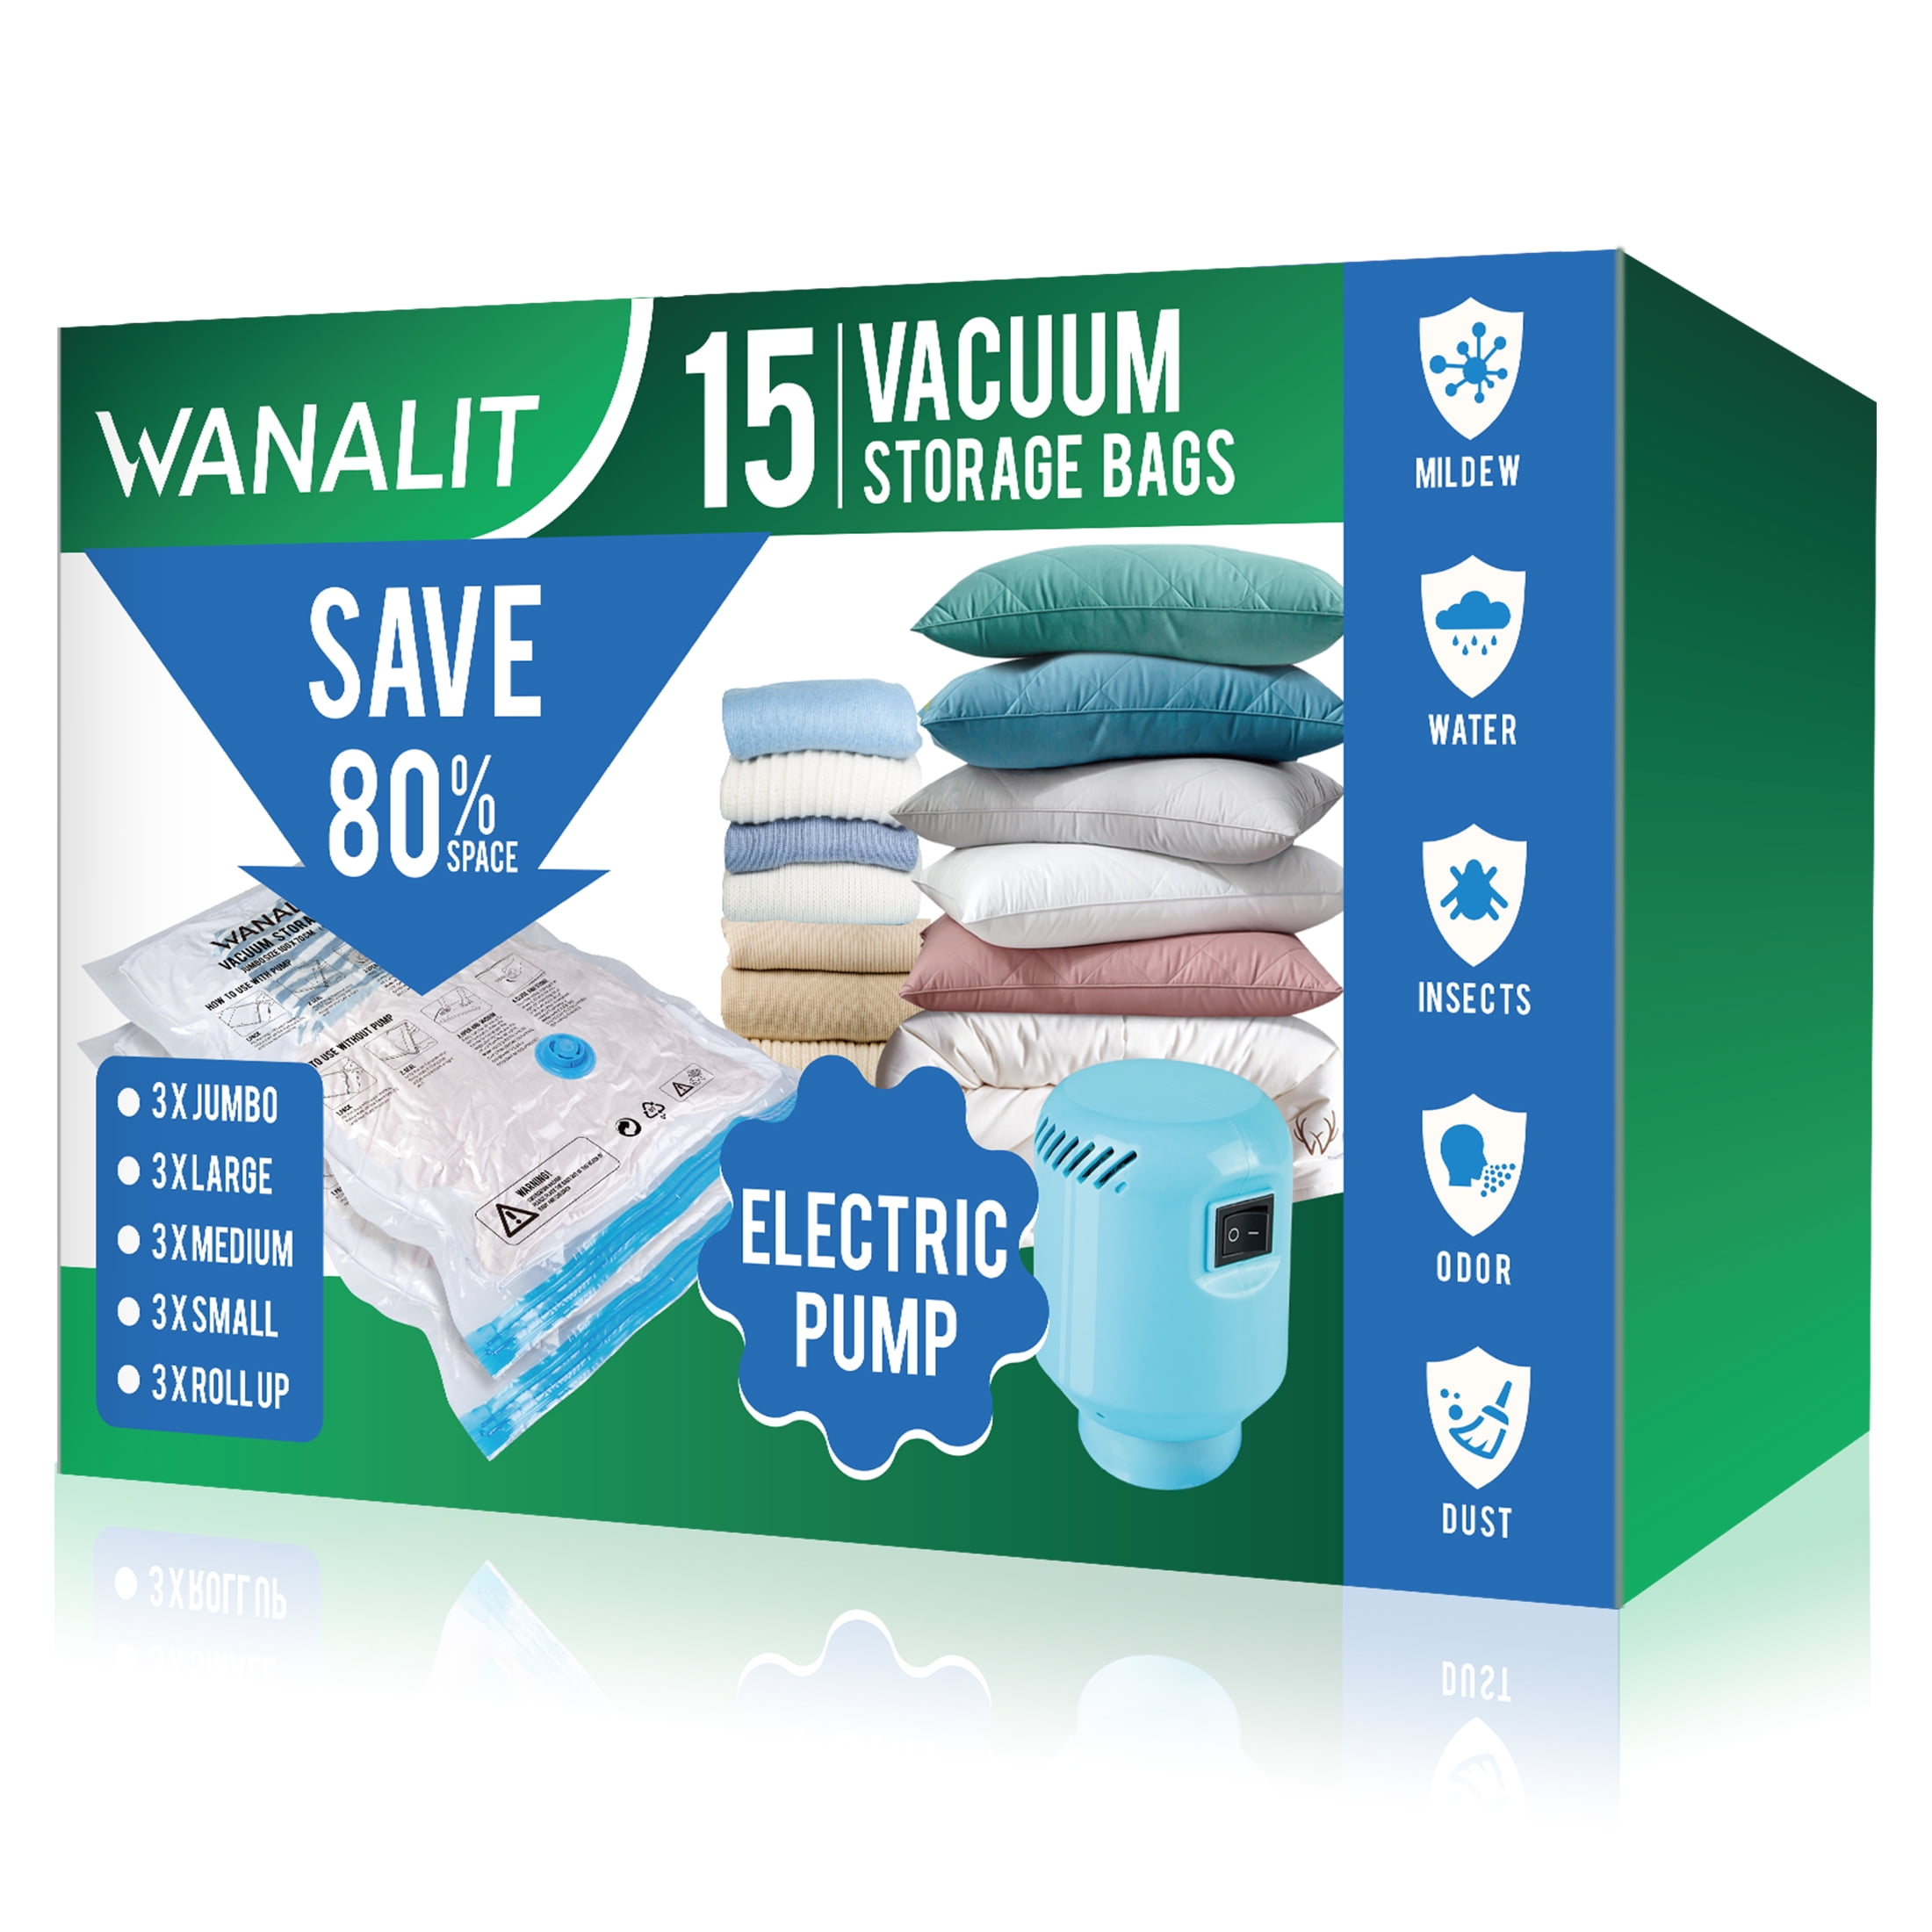 WANALIT Vacuum Storage Bags (10 Medium), Vacuum Sealer Compression Airtight  Bags with Electric Pump, Space Saver Bags for Clothes, Bedding, Pillows,  Comforters, Blankets Storage 